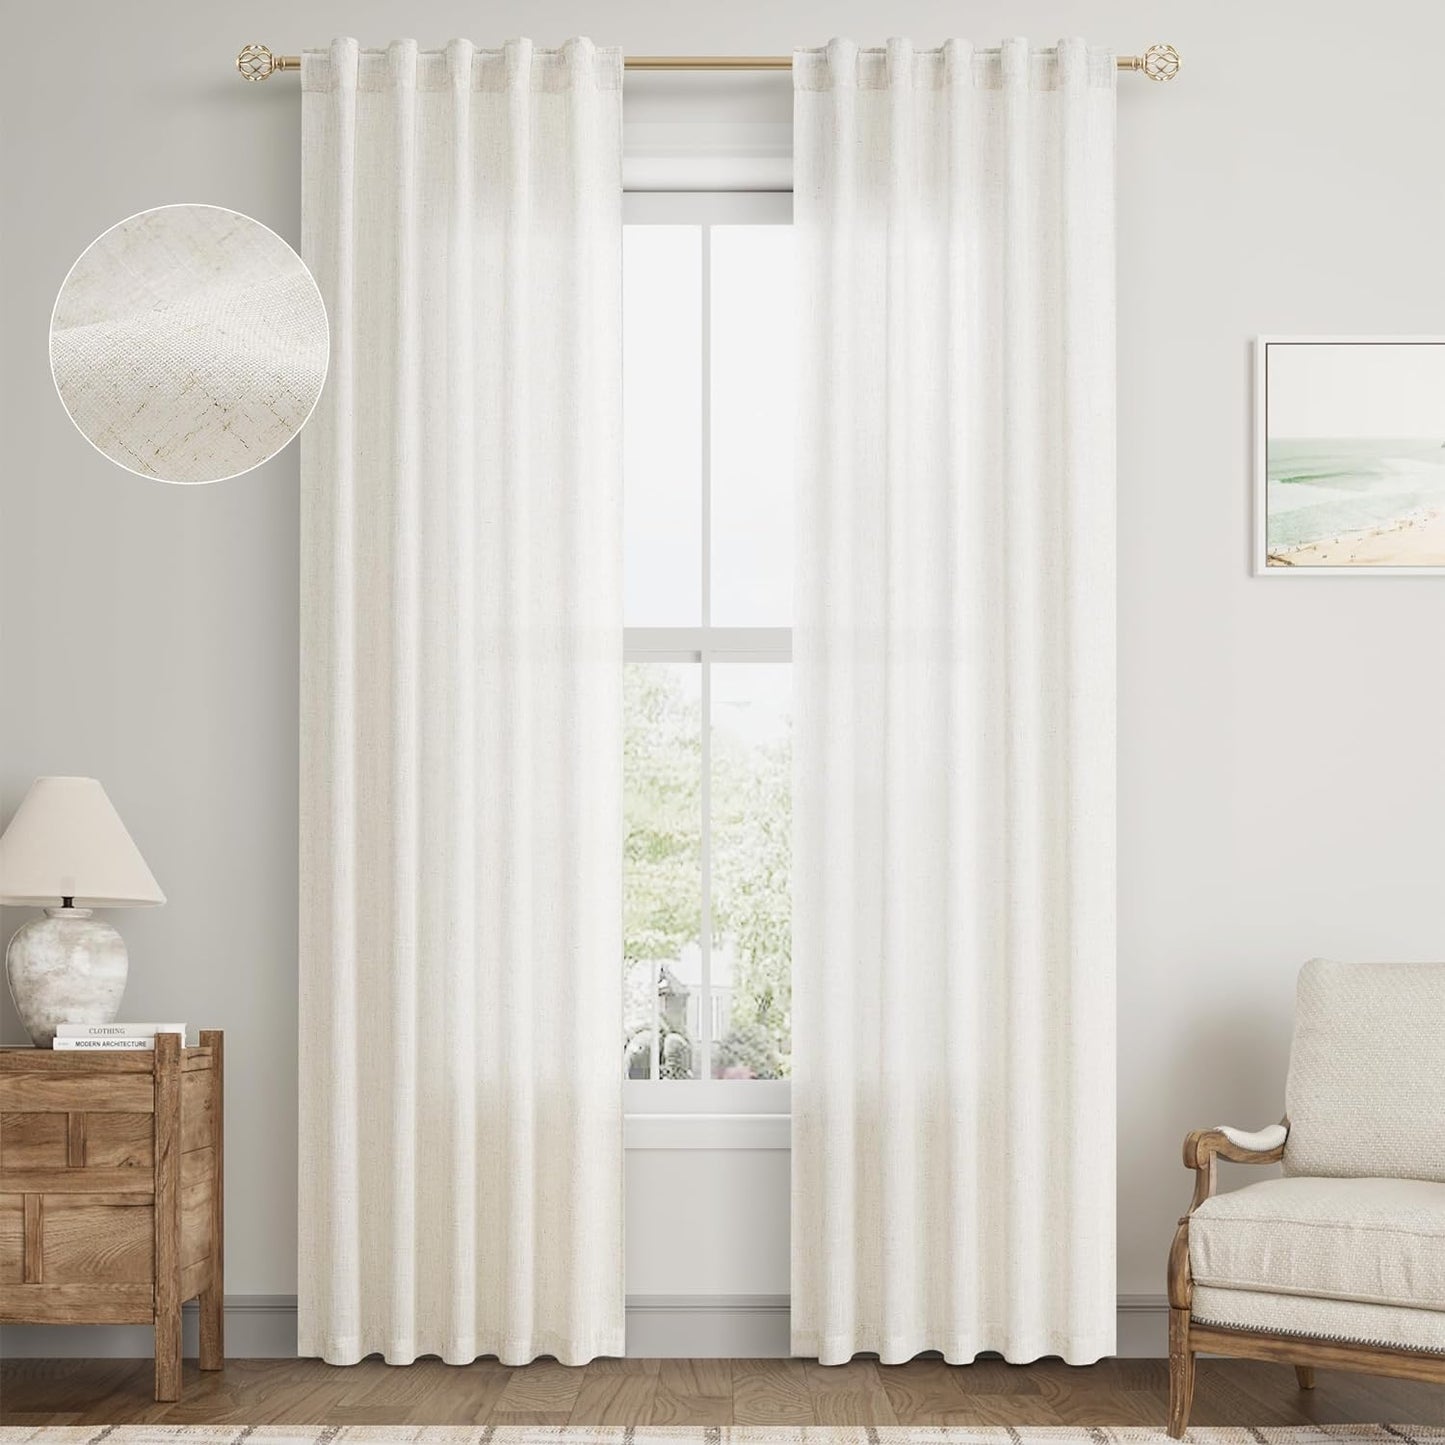 Natural Linen Sheer Curtains 84 Inch Long for Living Room Bedroom Back Tab Light Filtering Privacy Farmhouse Rod Pocket Ivory off White Neutral Drapes with Hooks 2 Panels Cream Beige  SPWIY Natural 40W X 80L Inch X 2 Panels 